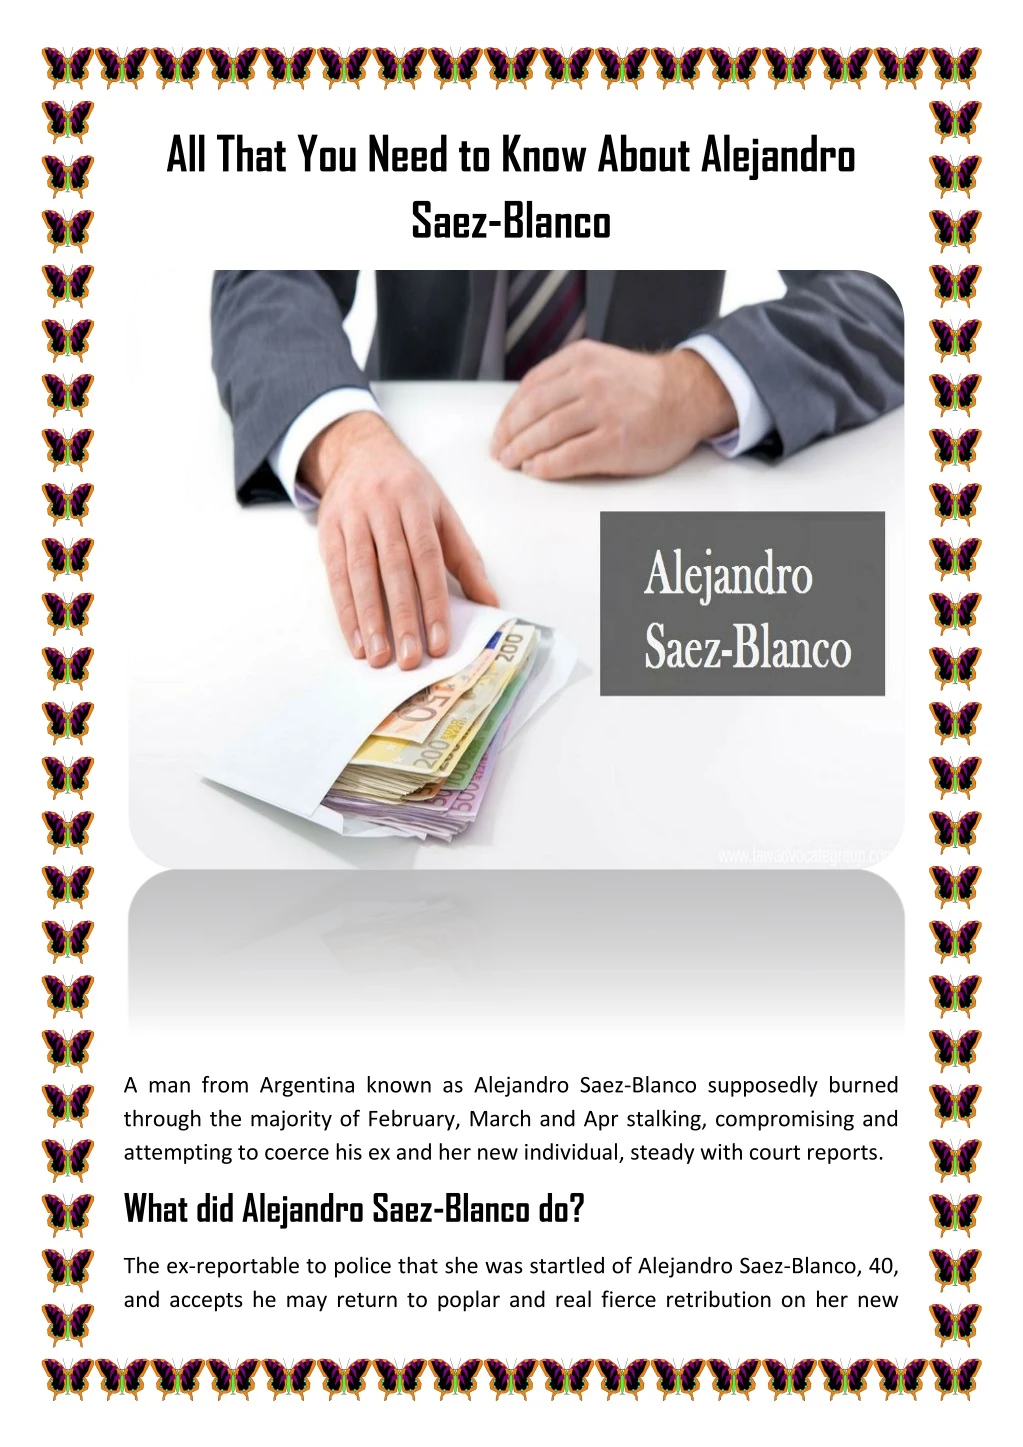 all that you need to know about alejandro saez